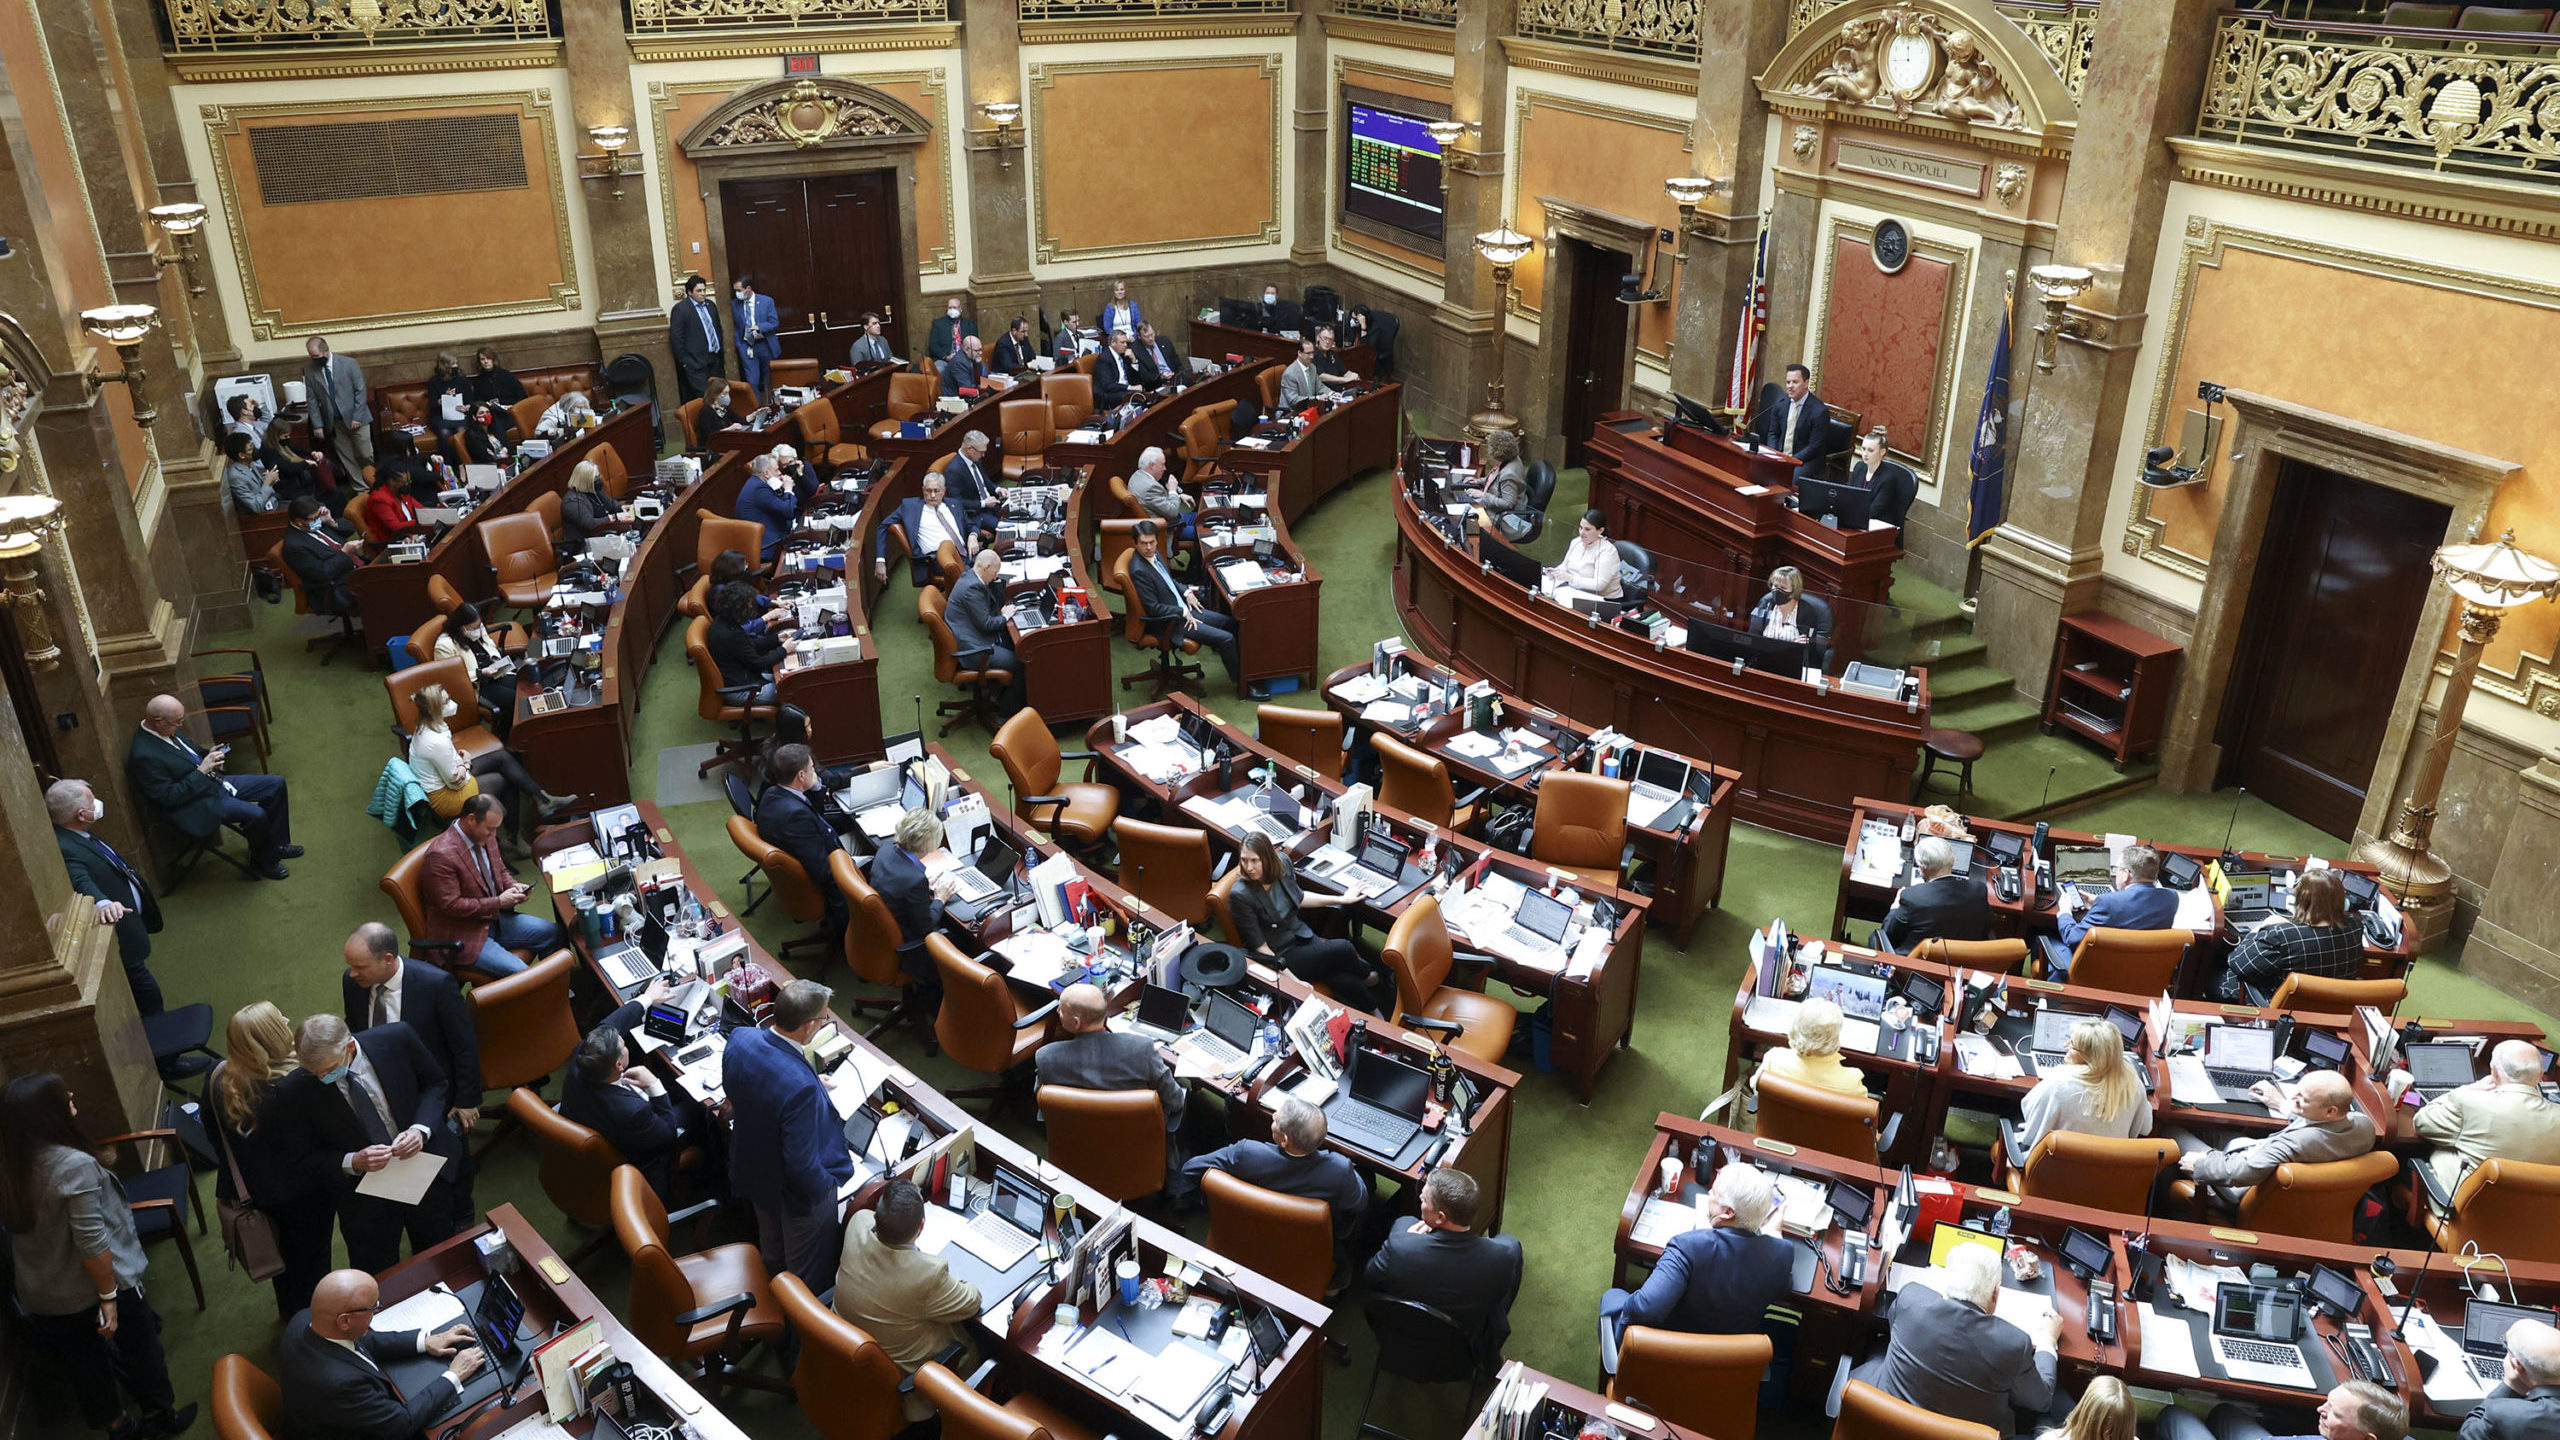 Day one of Utah's legislative session is here. For the next 45 days, Utah's capitol hill will be bu...